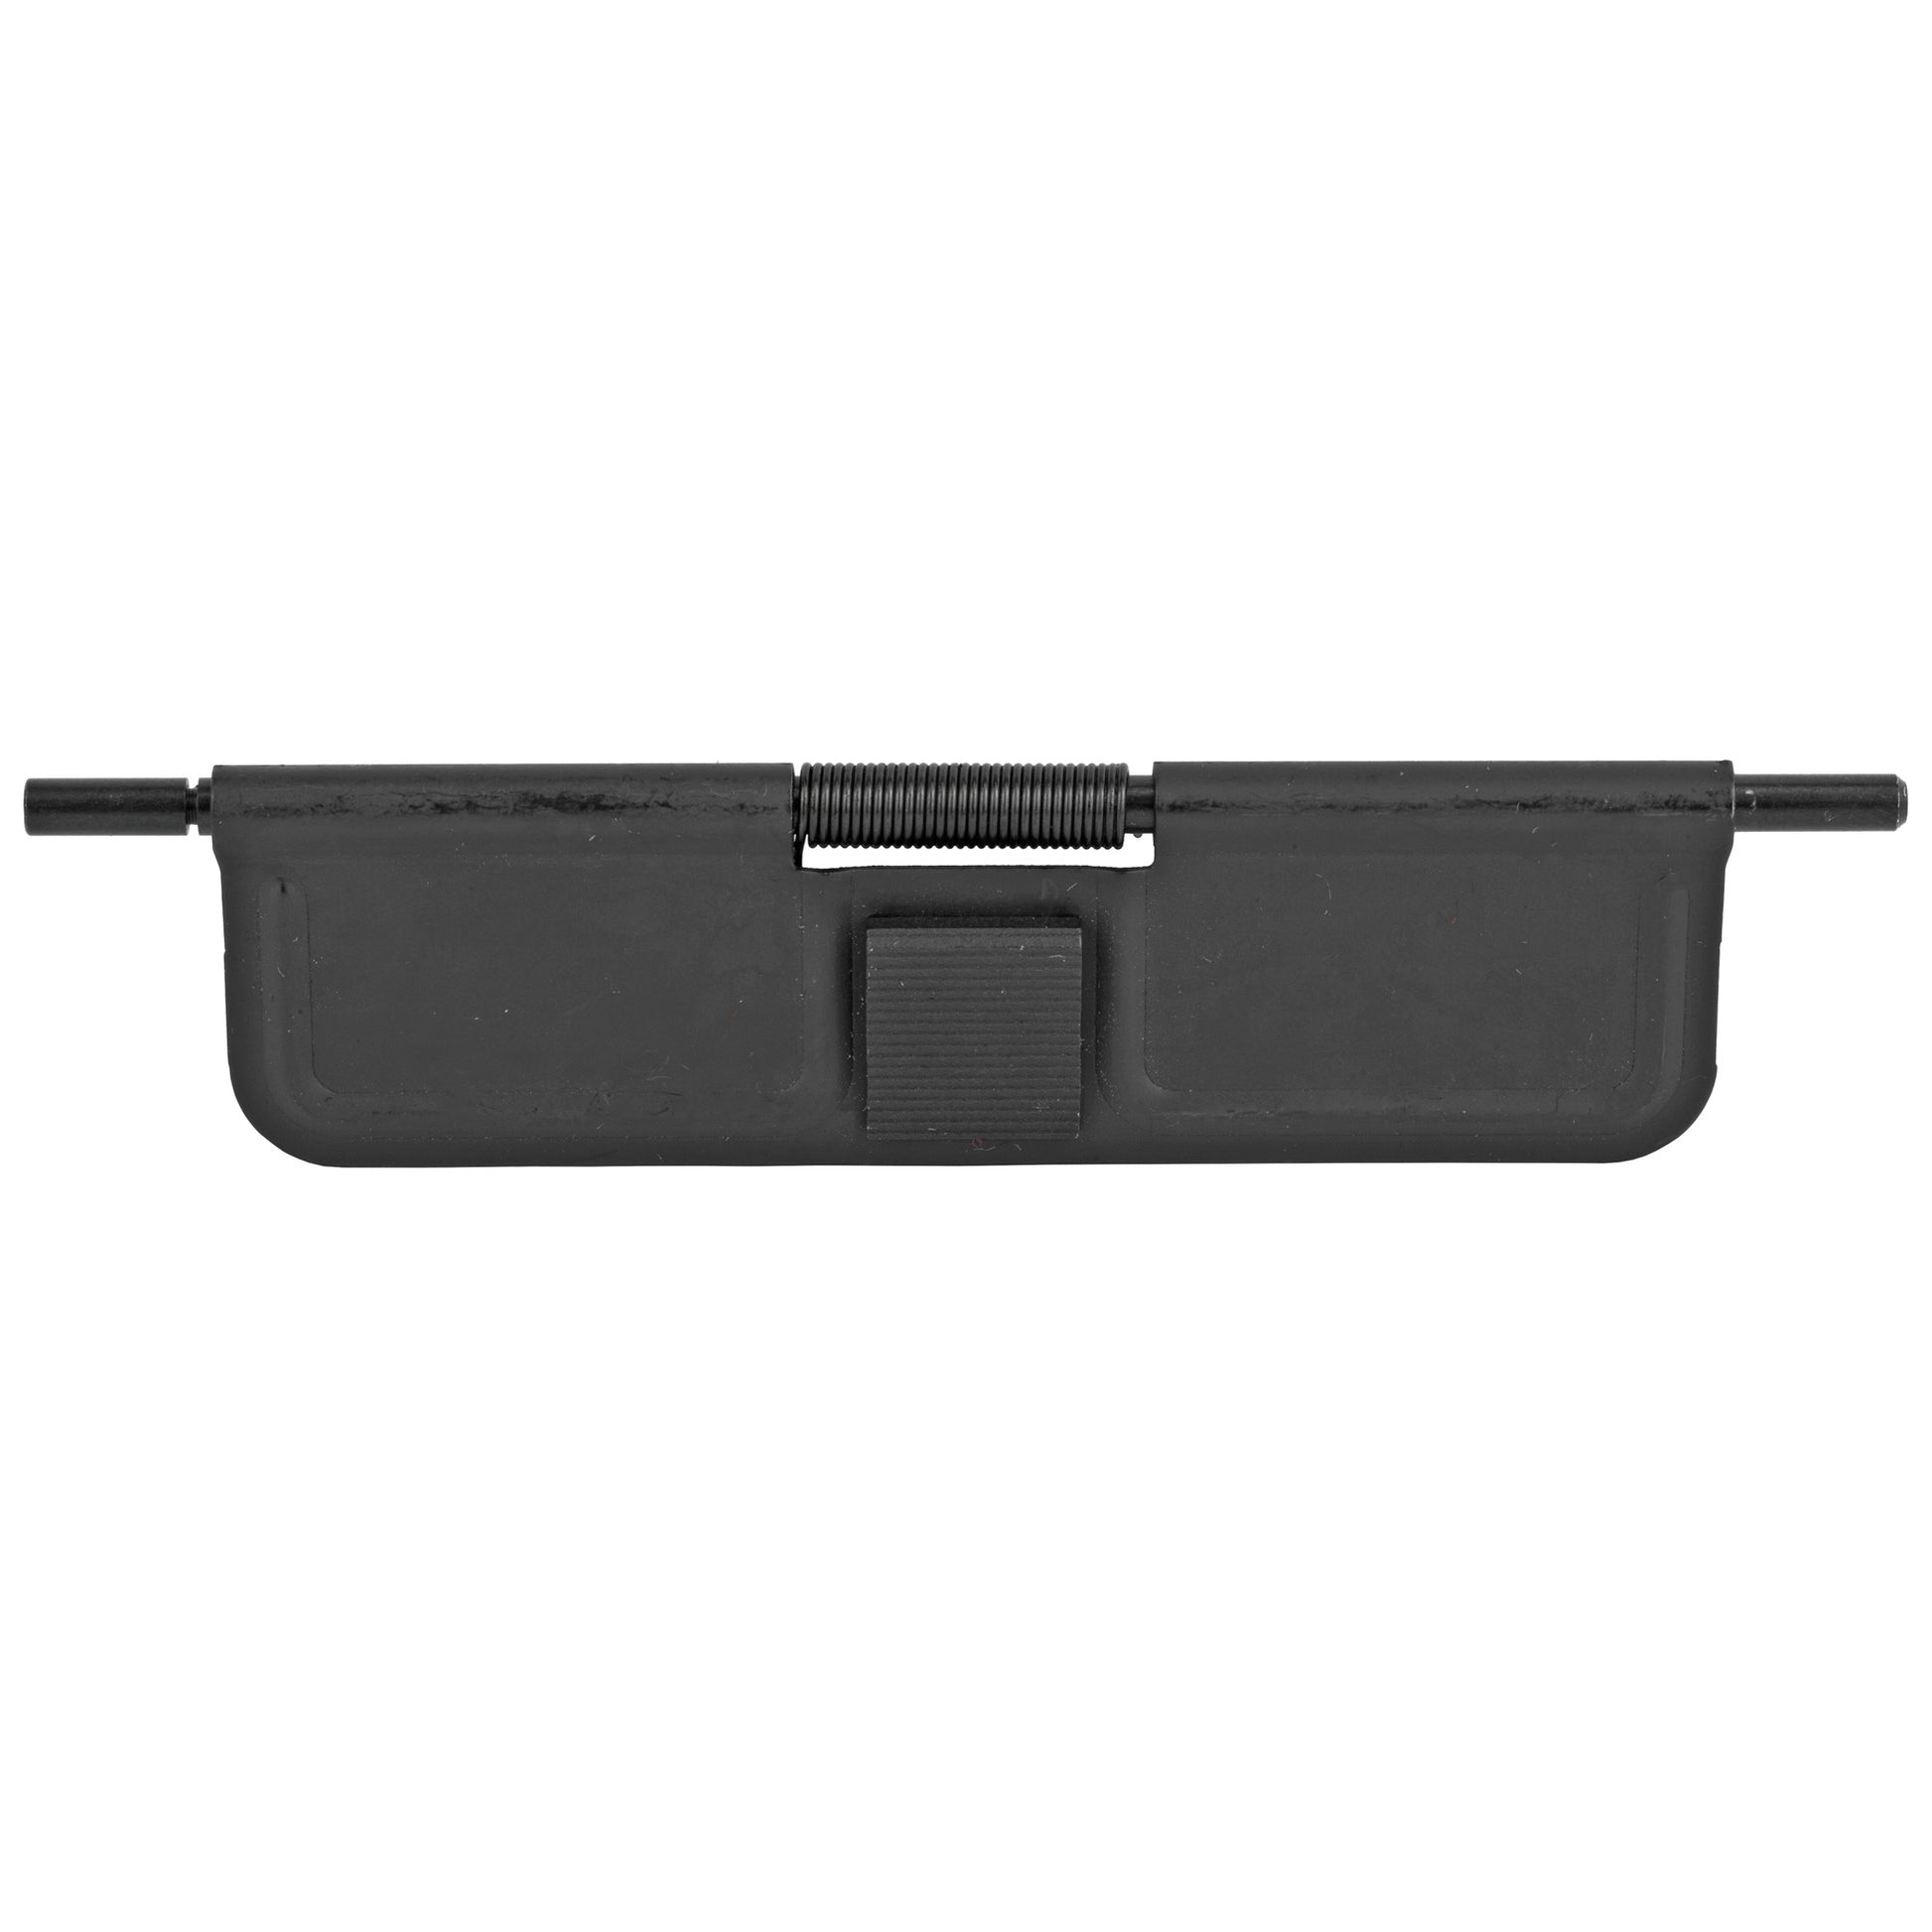  Bastion Dont Tread On Me AR-15 Ejection Port Dust Cover BASEPDCBW75DTOM - California Shooting Supplies